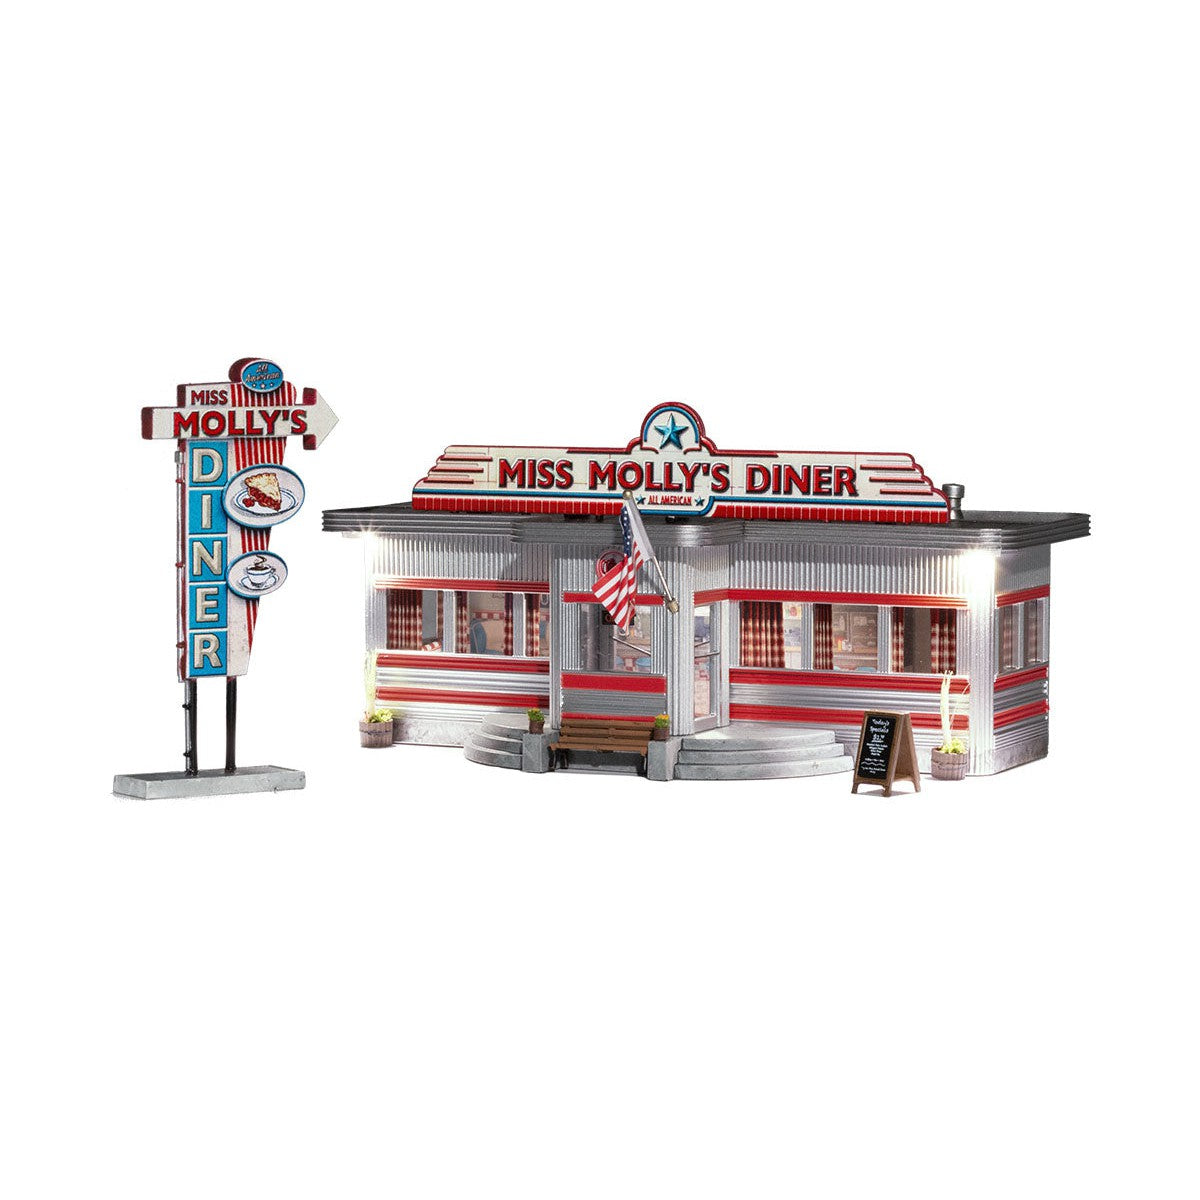 Woodland Scenics N Scale Miss Molly’s Diner Built and Ready